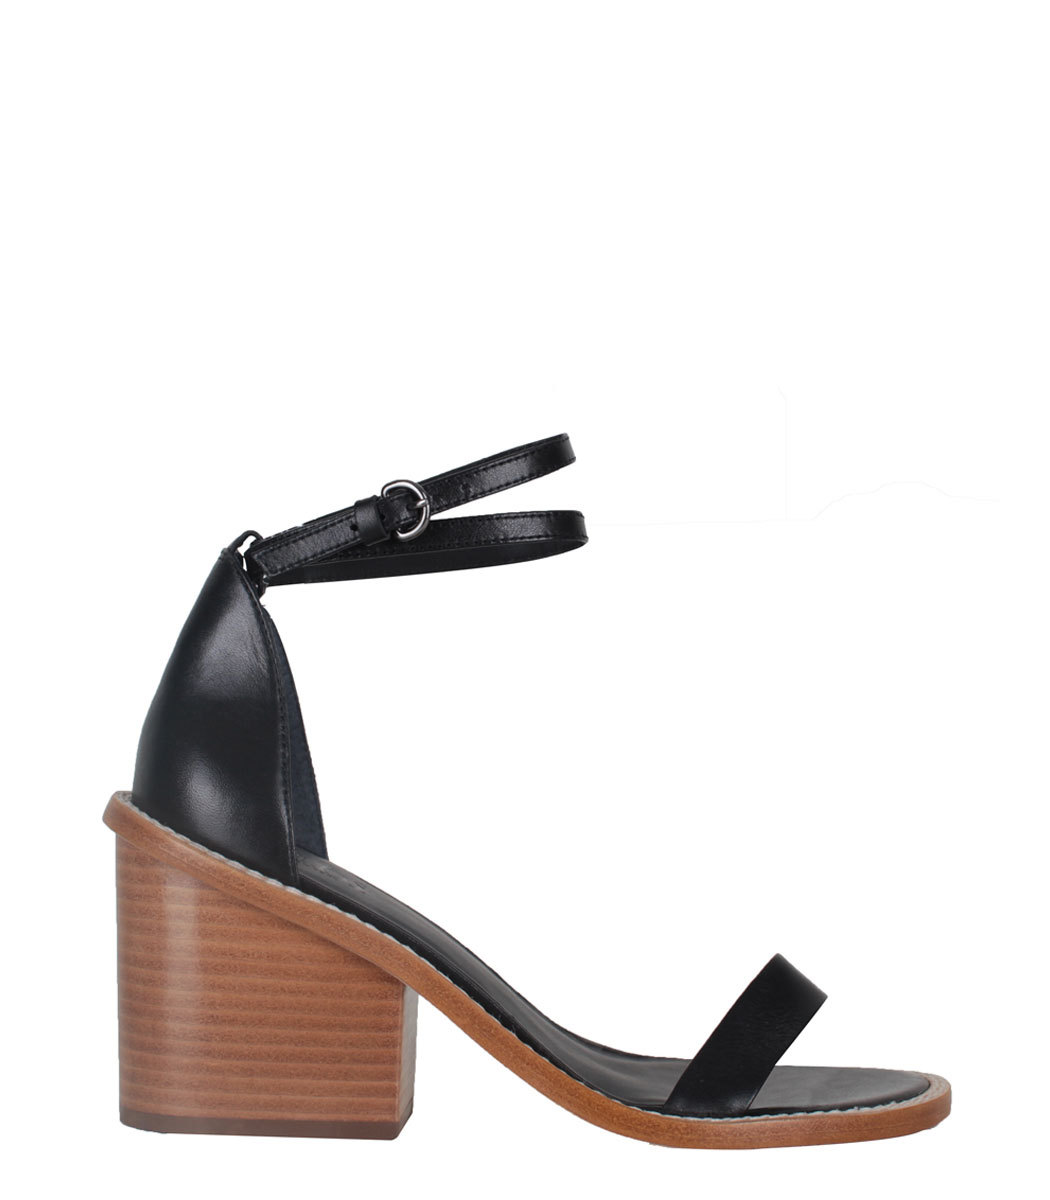  The contrast of an earthy block heel with sumptuous black leather is sleek and modern on these Tibi sandals. I think it would look smashing with this  Isabel Marant jumpsuit . Tibi sandals, $385, at  ShopBazaar .&nbsp; 